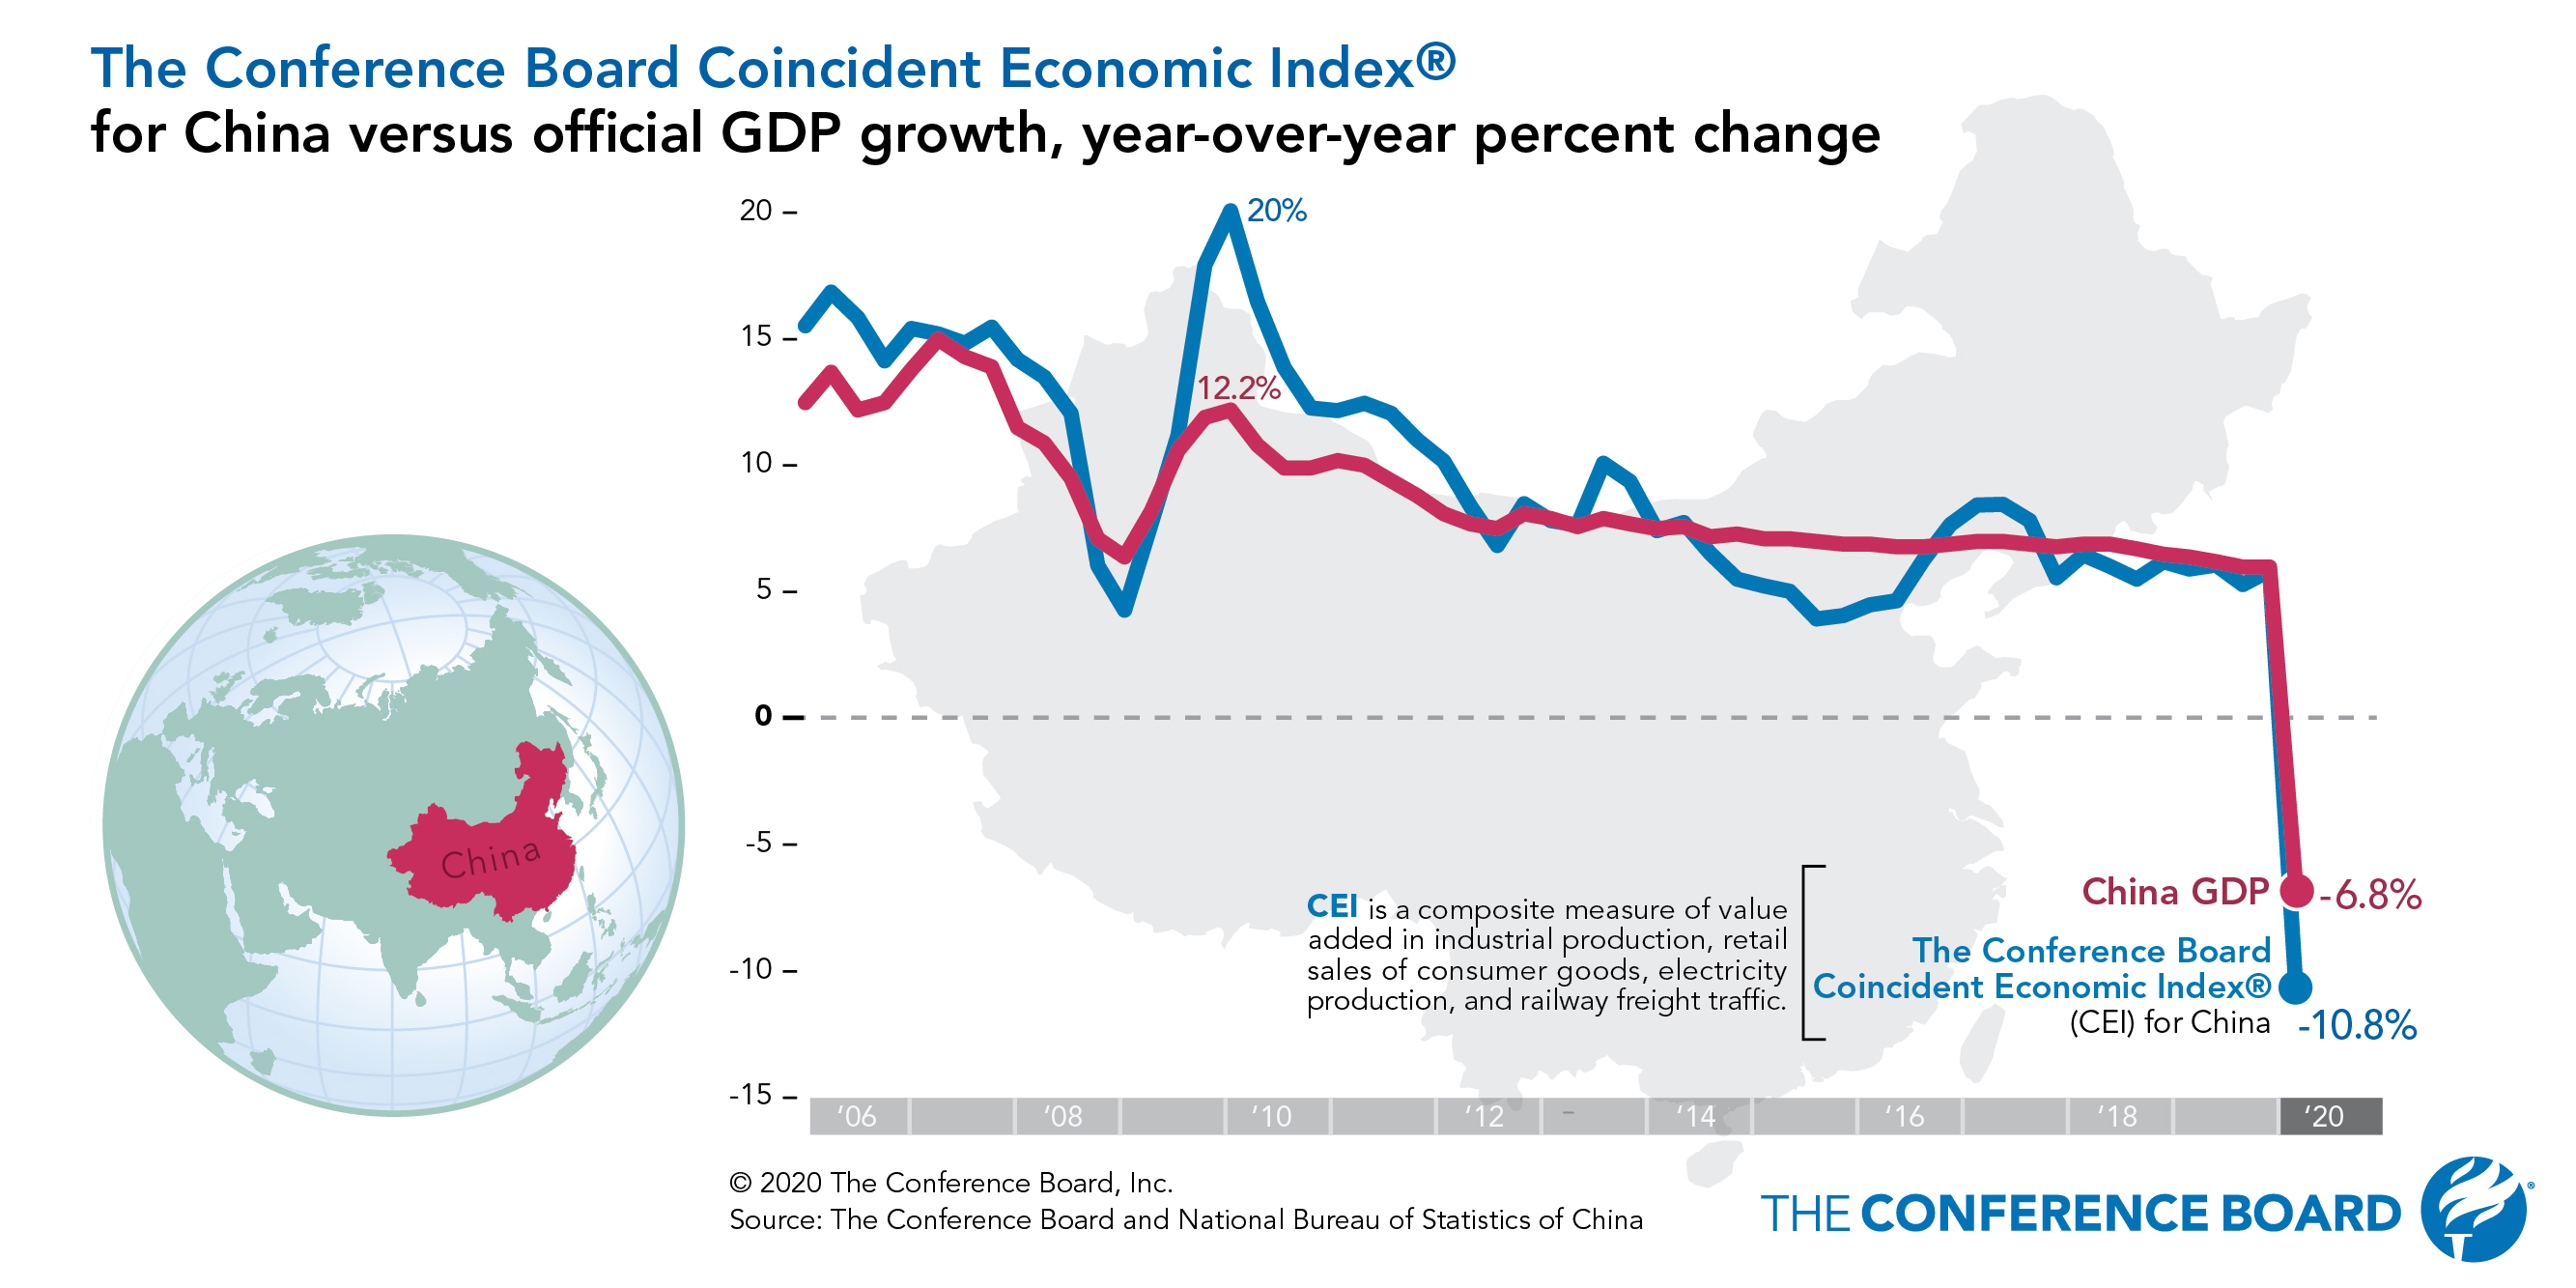 COVID-19's impact in China: Business activity shows deeper drop than GDP